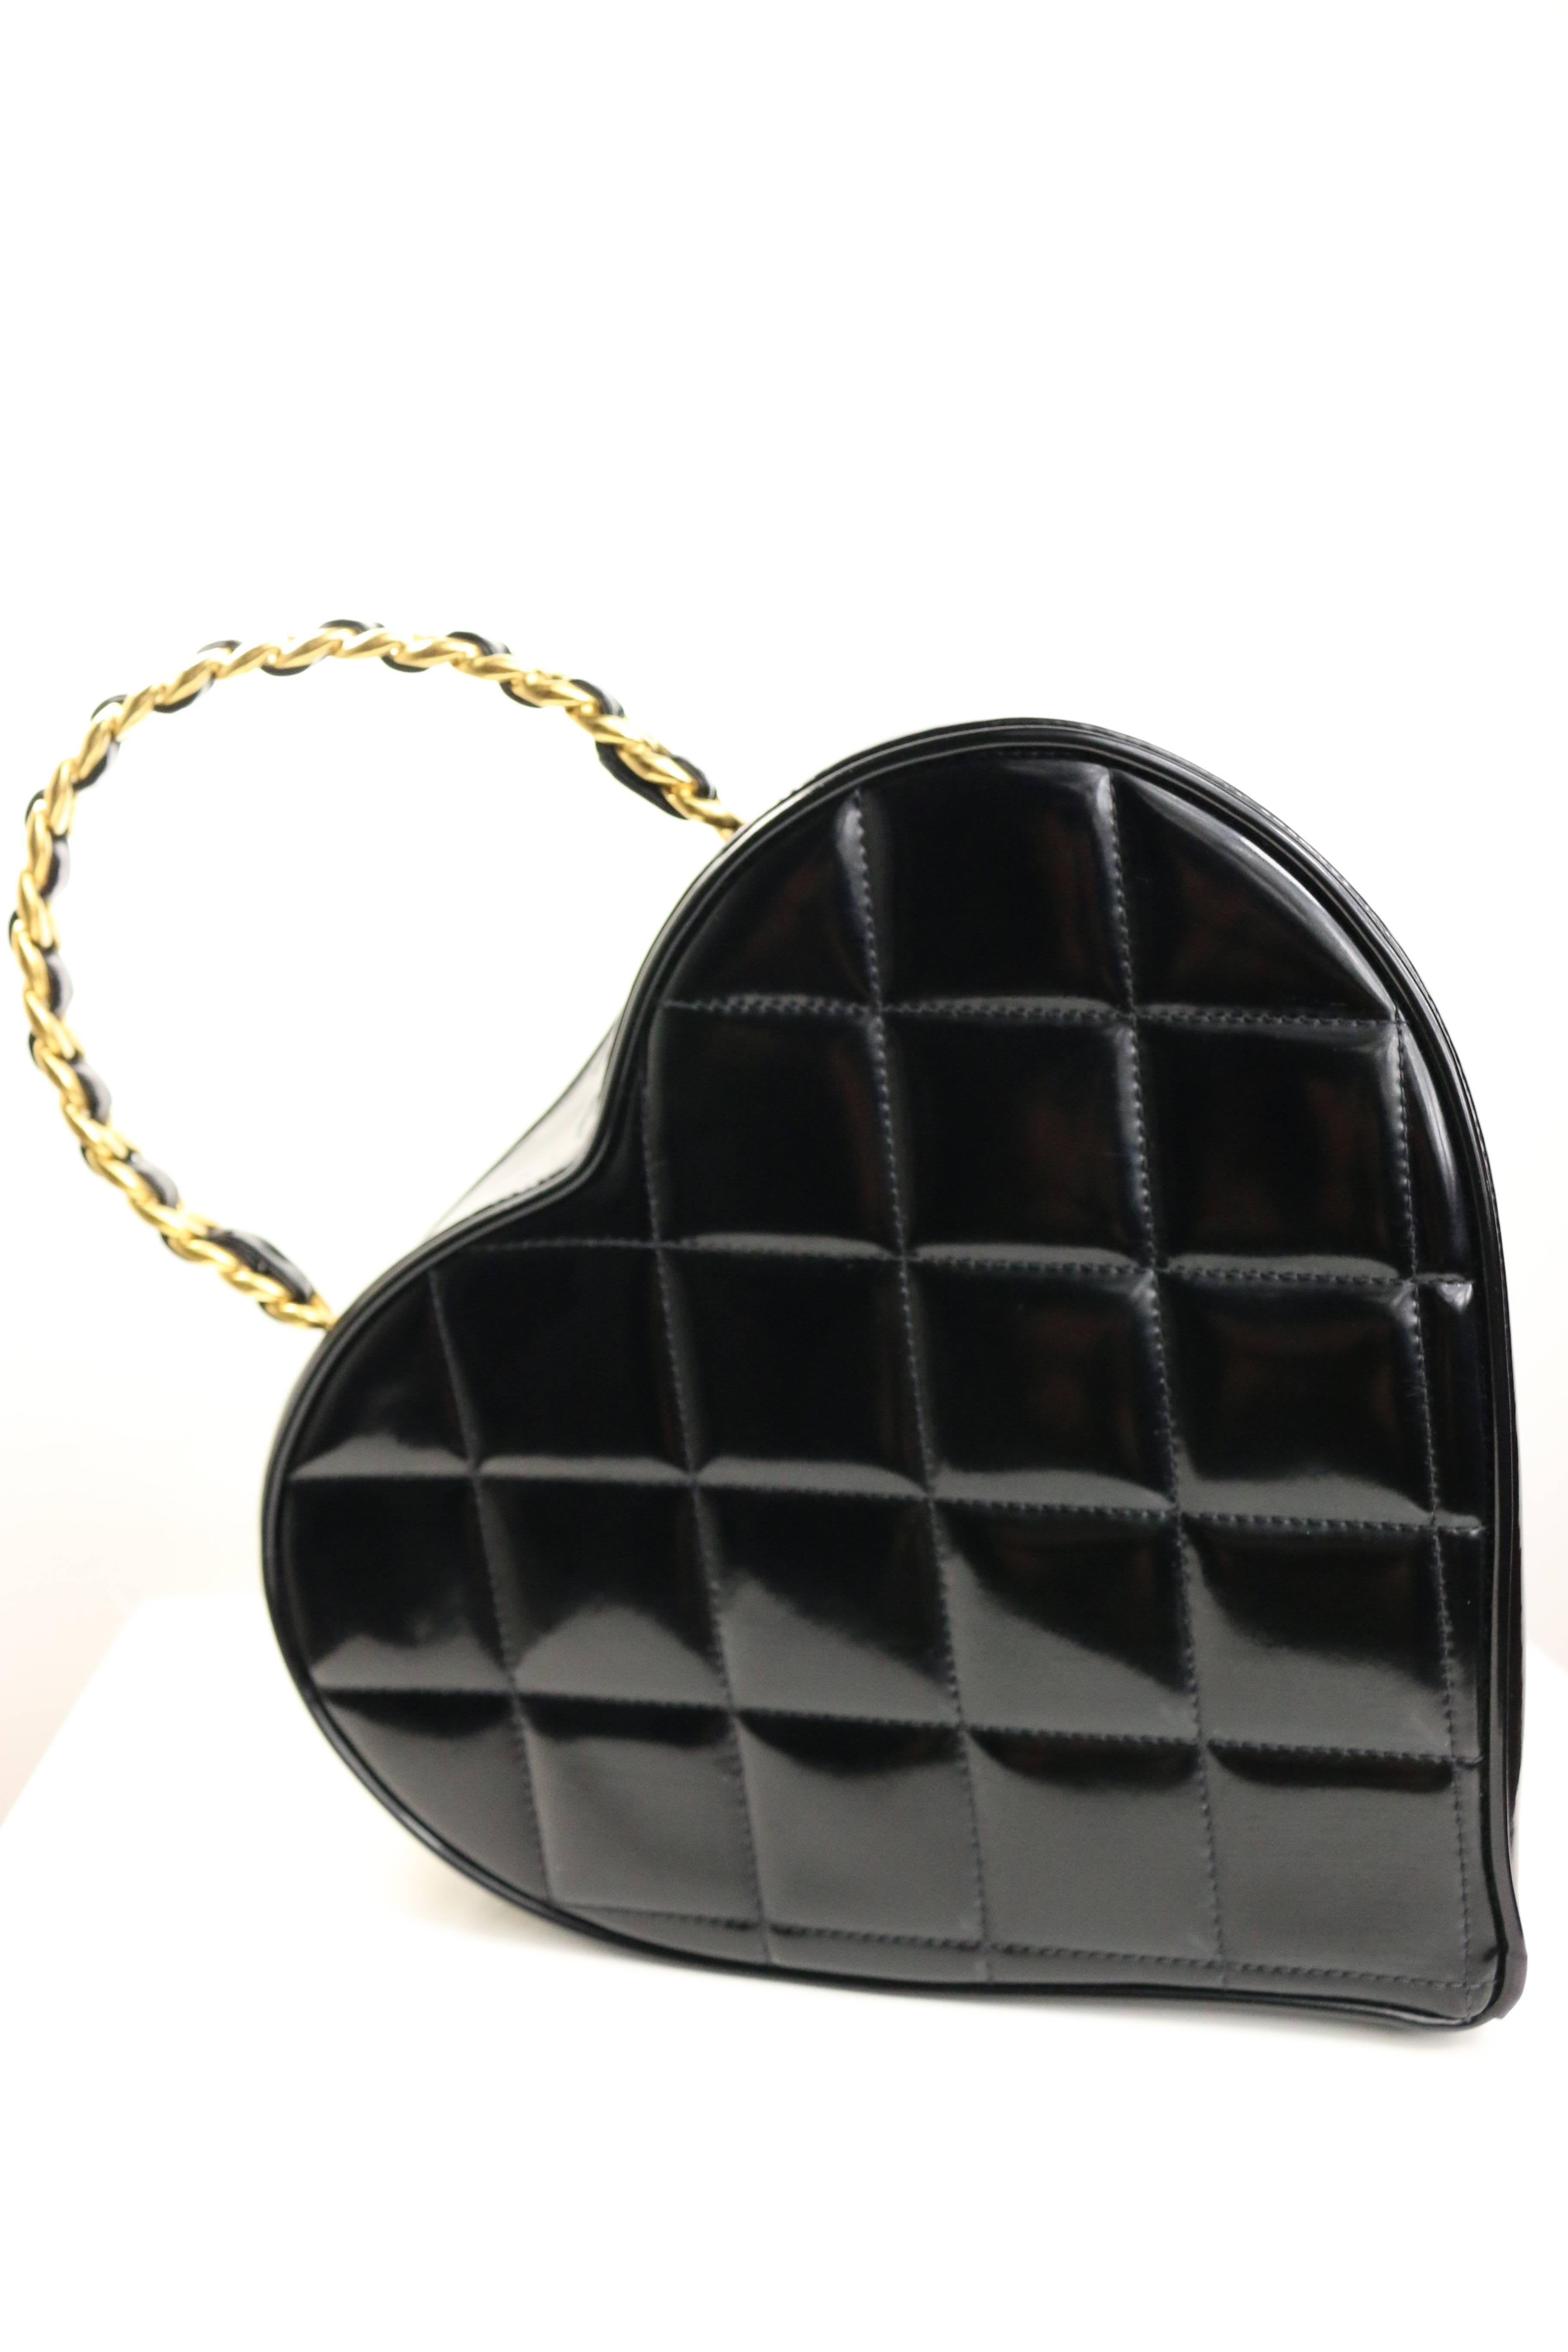 - Vintage Chanel black patent quilted leather heart-shaped vanity chain handbag from 1995 collection. 

- Featuring a woven gold-tone chain and interlocking "CC" logo in white across the front.

- Made in France. 

- Height: 9